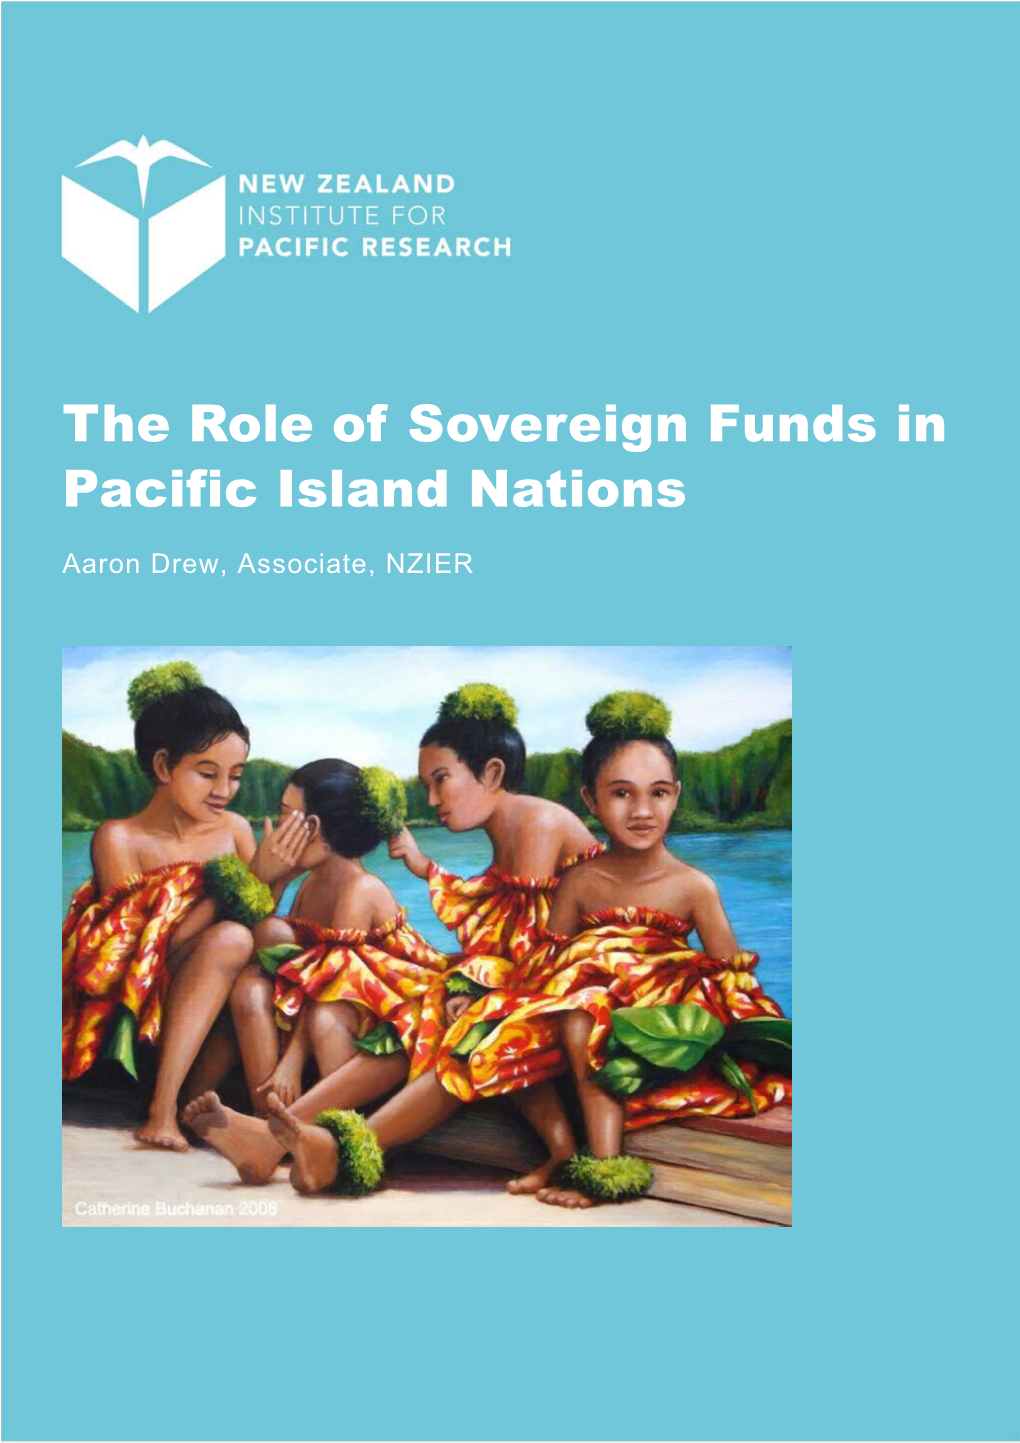 The Role of Sovereign Funds in Pacific Island Nations